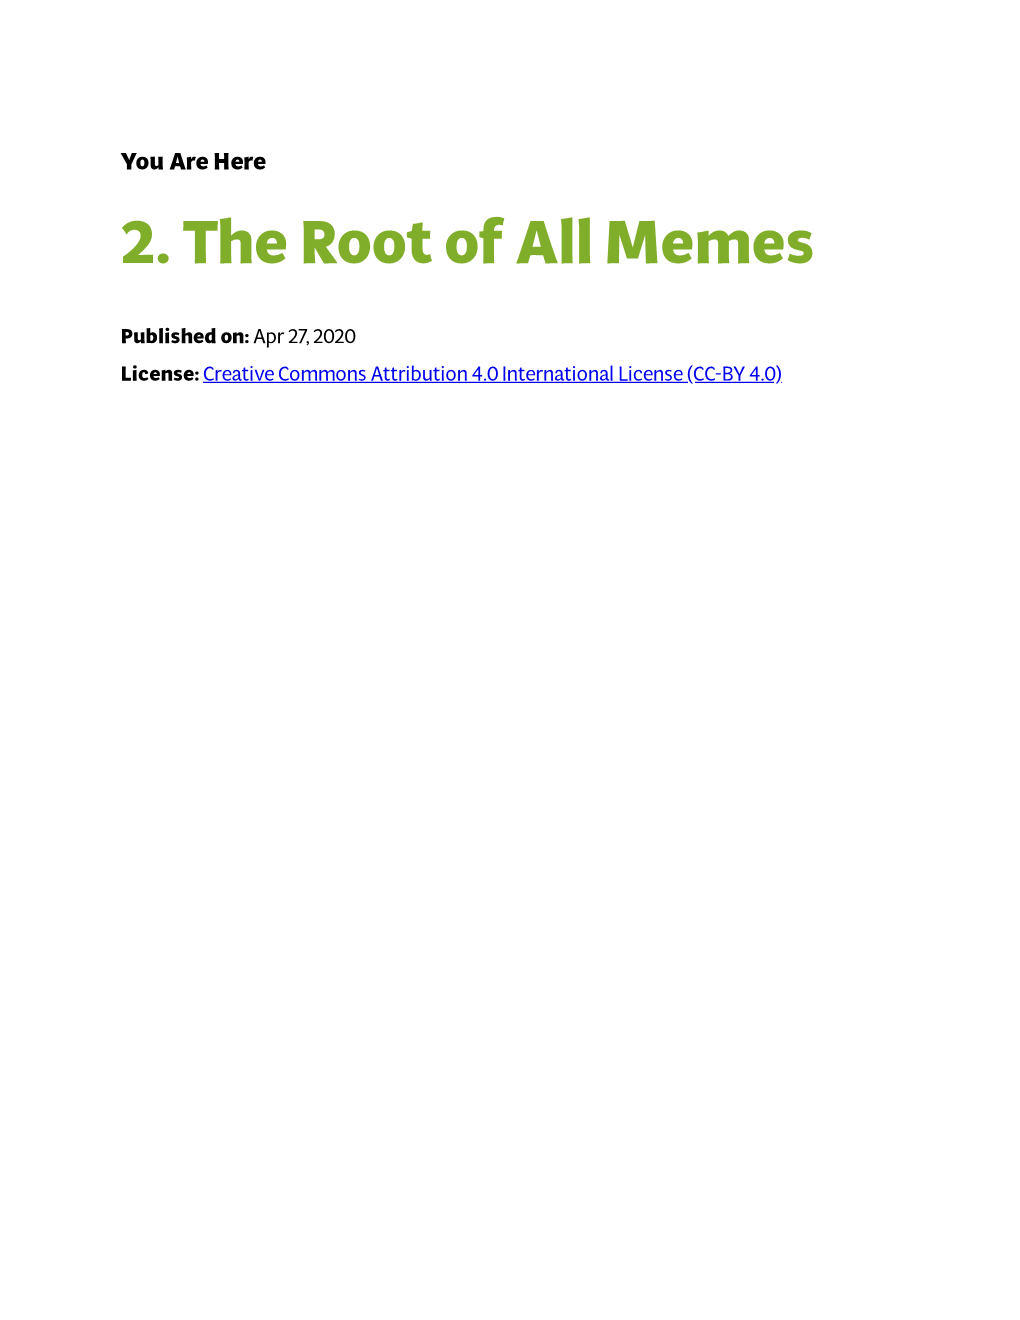 2. the Root of All Memes